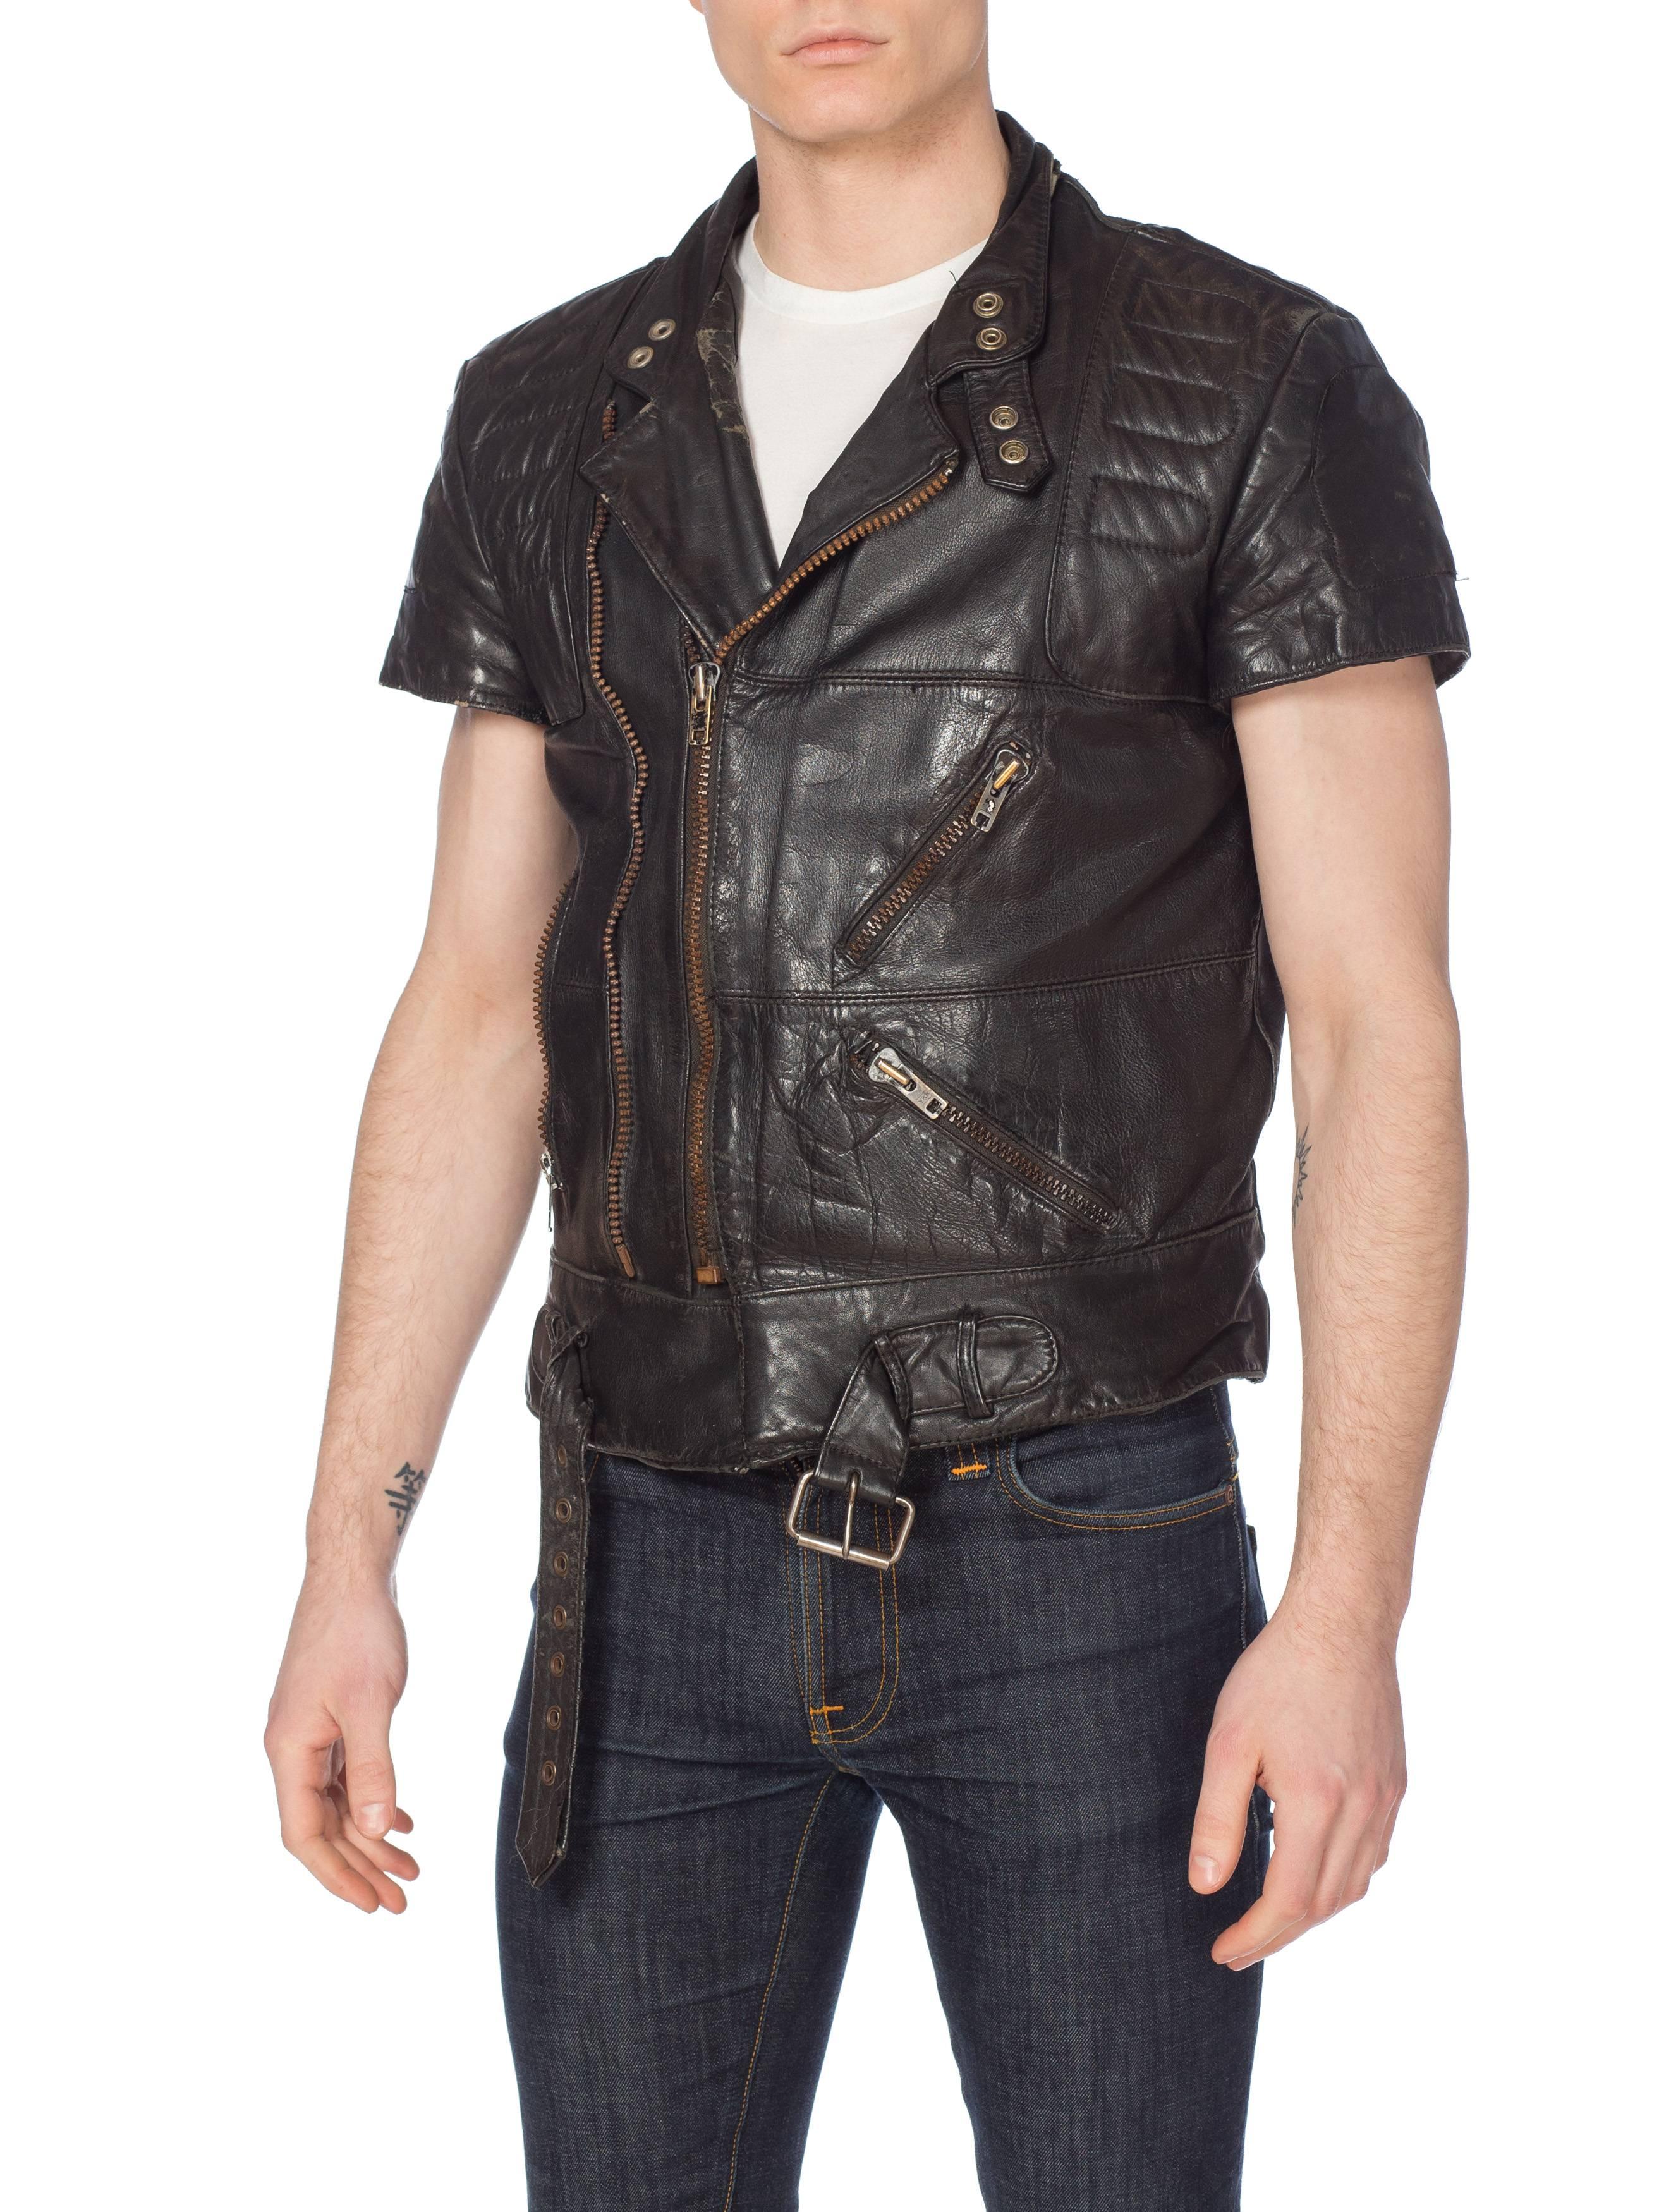 Mens Cropped Sleeve Leather Biker Jacket Formerly Belonging to the Band Justice 9